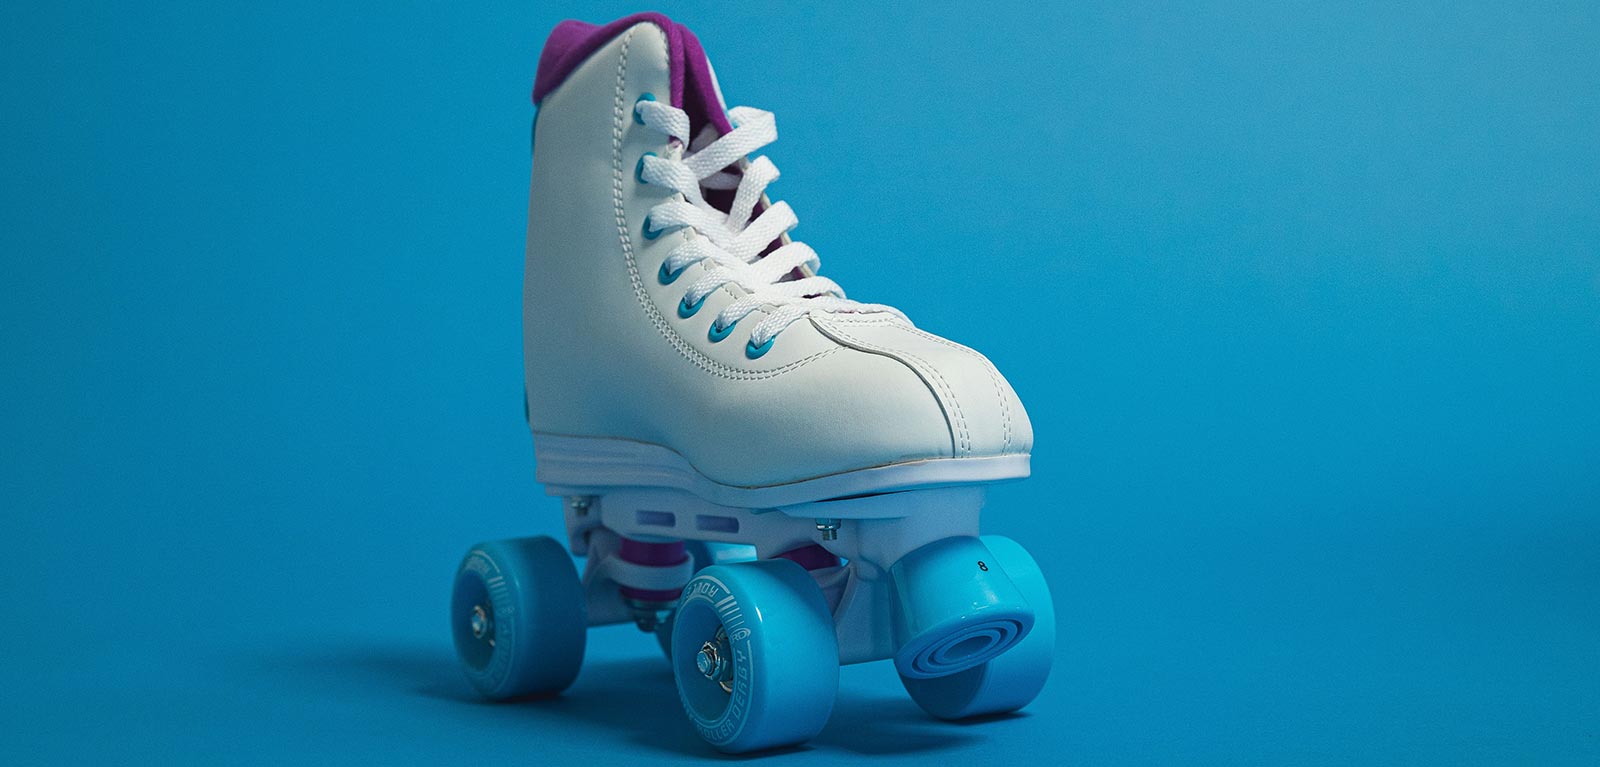 Roller boot on a blue background